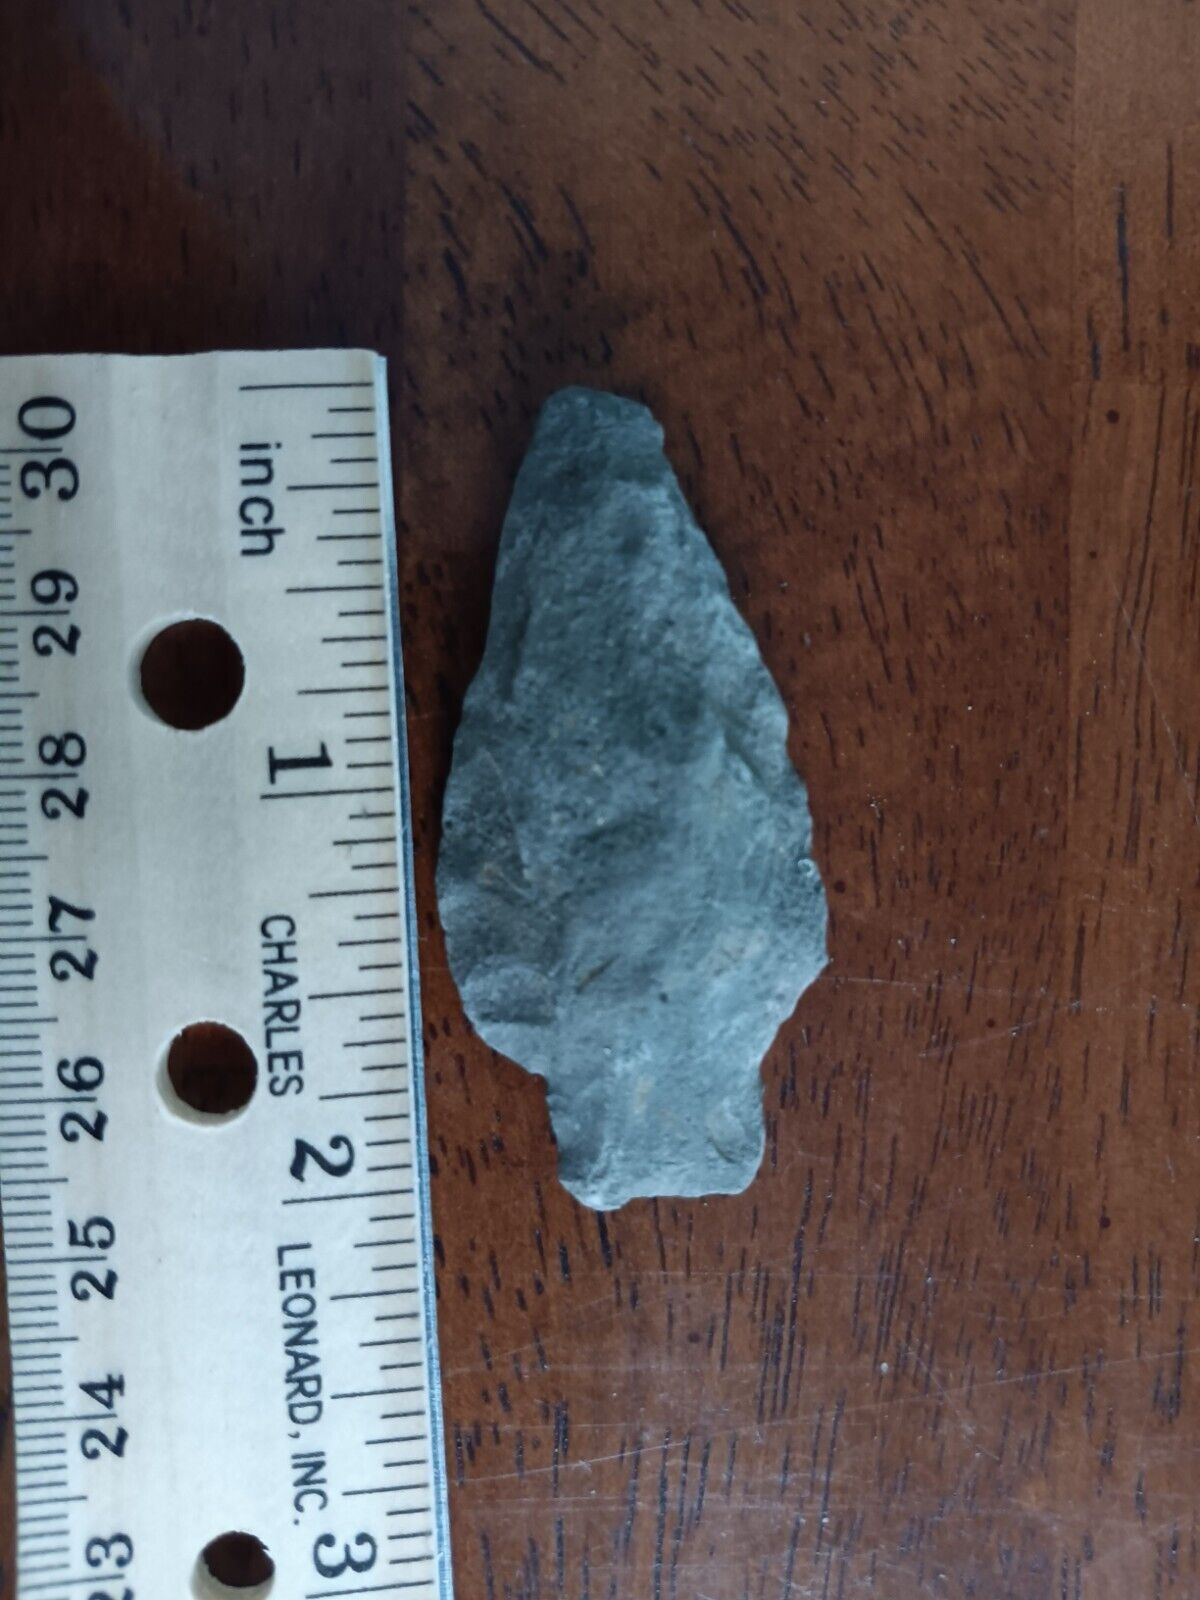 AUTHENTIC NATIVE AMERICAN INDIAN ARTIFACT FOUND, EASTERN N.C.--- ZZZ/84